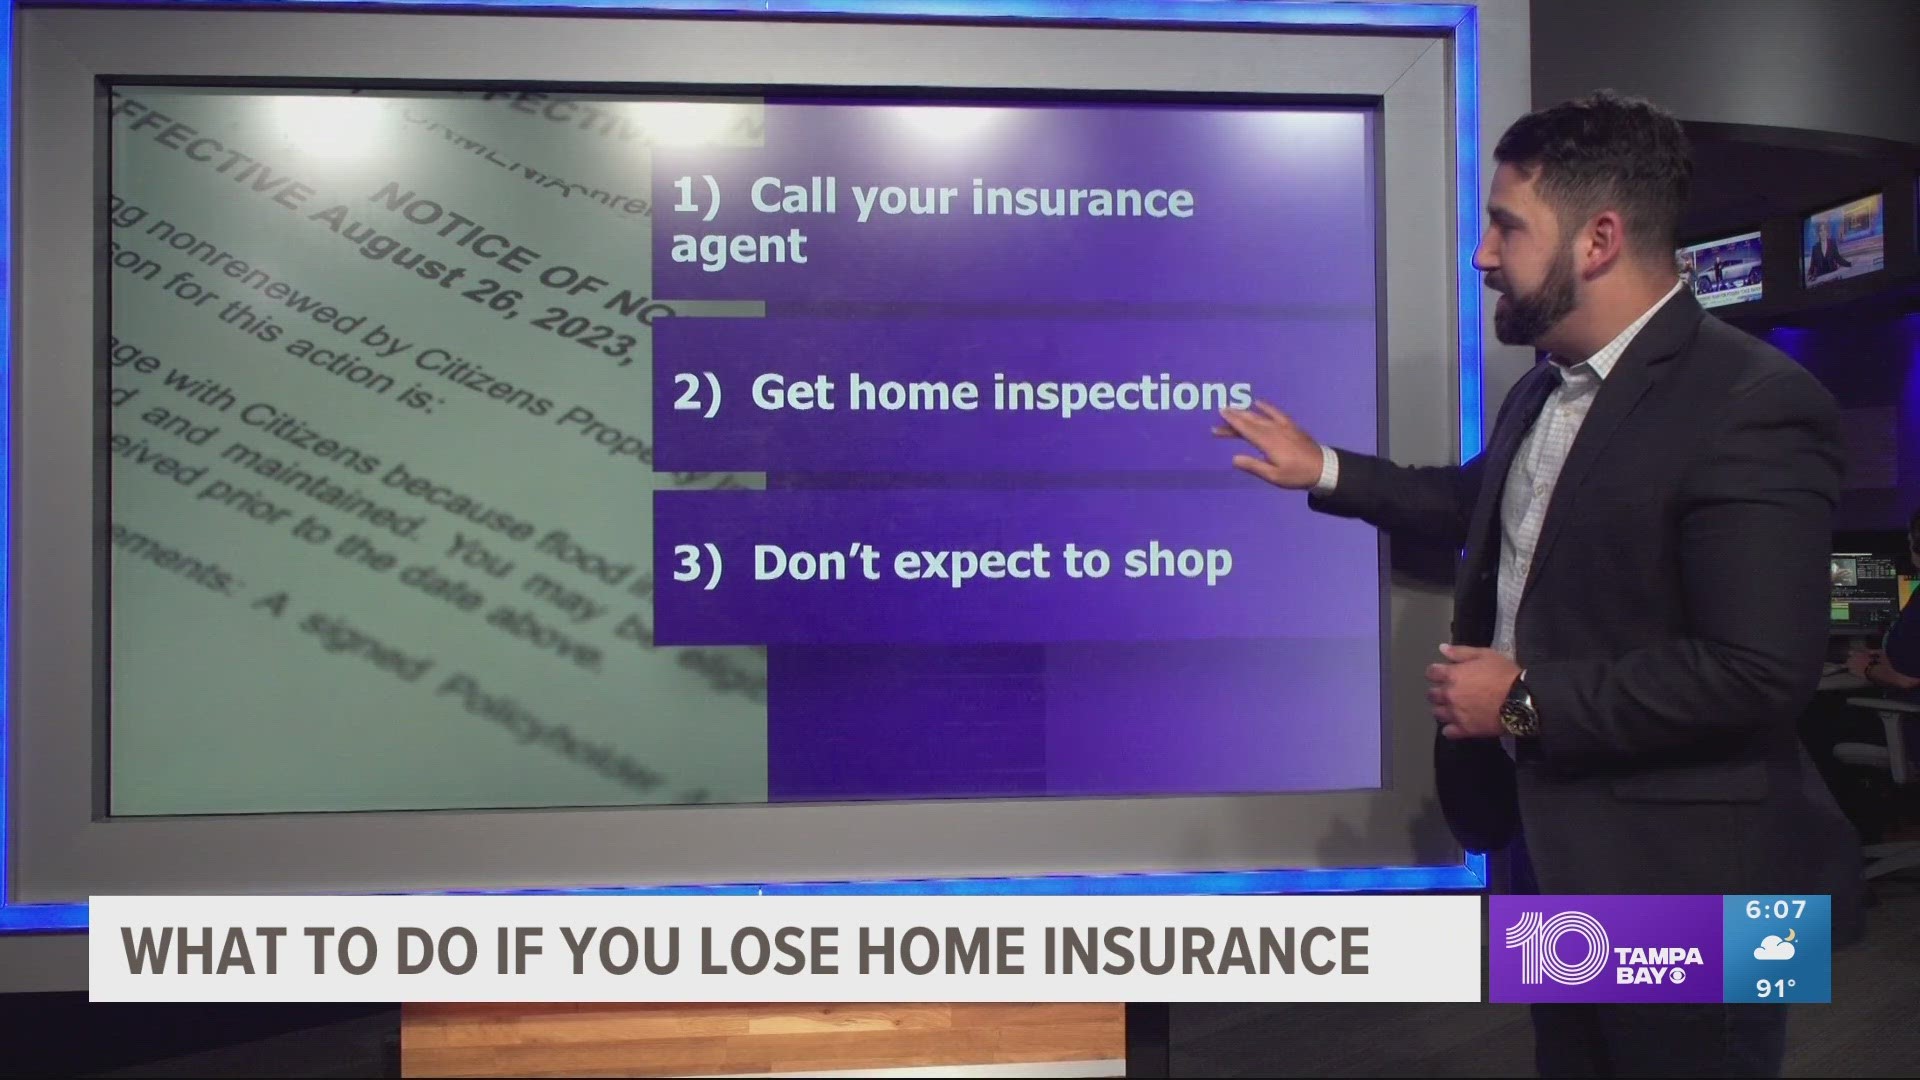 We spoke with Kathy Walsh, agency owner at Coast to Coast Insurance in Tampa. She says the first thing you should do is call your insurance agent.